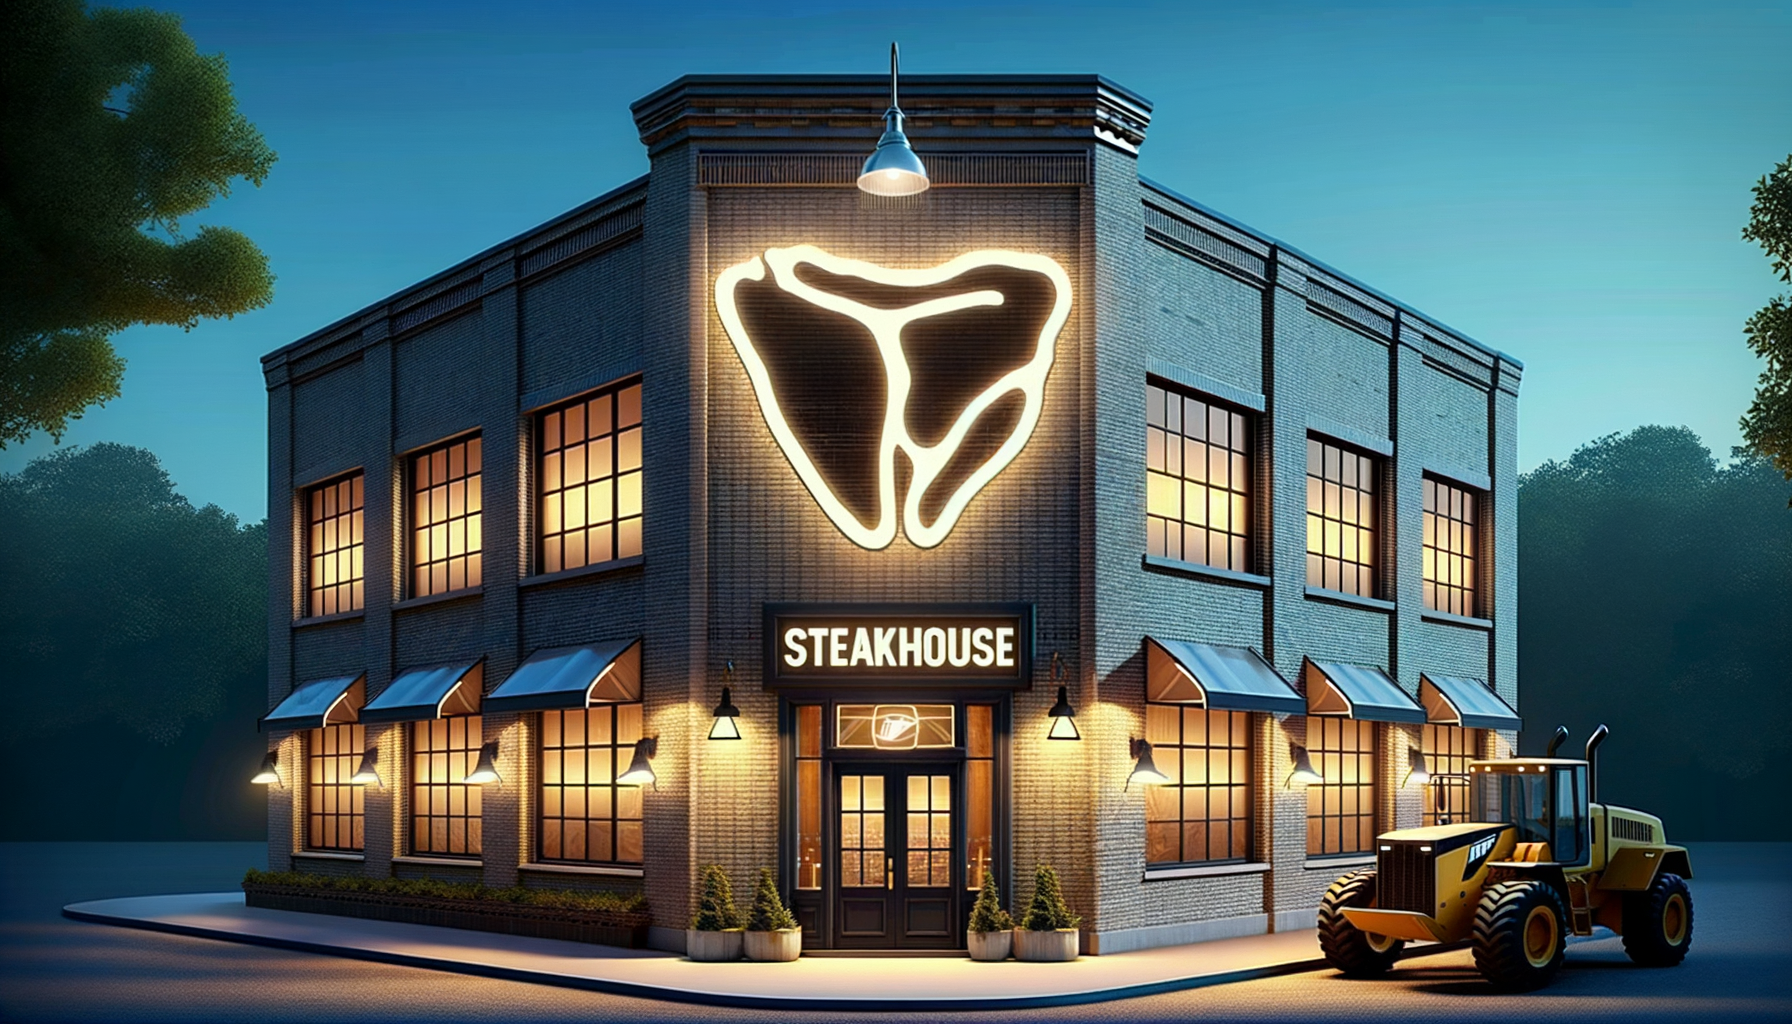 discover the fascinating story of how a steakhouse contributed to the creation of this iconic equipment logo.